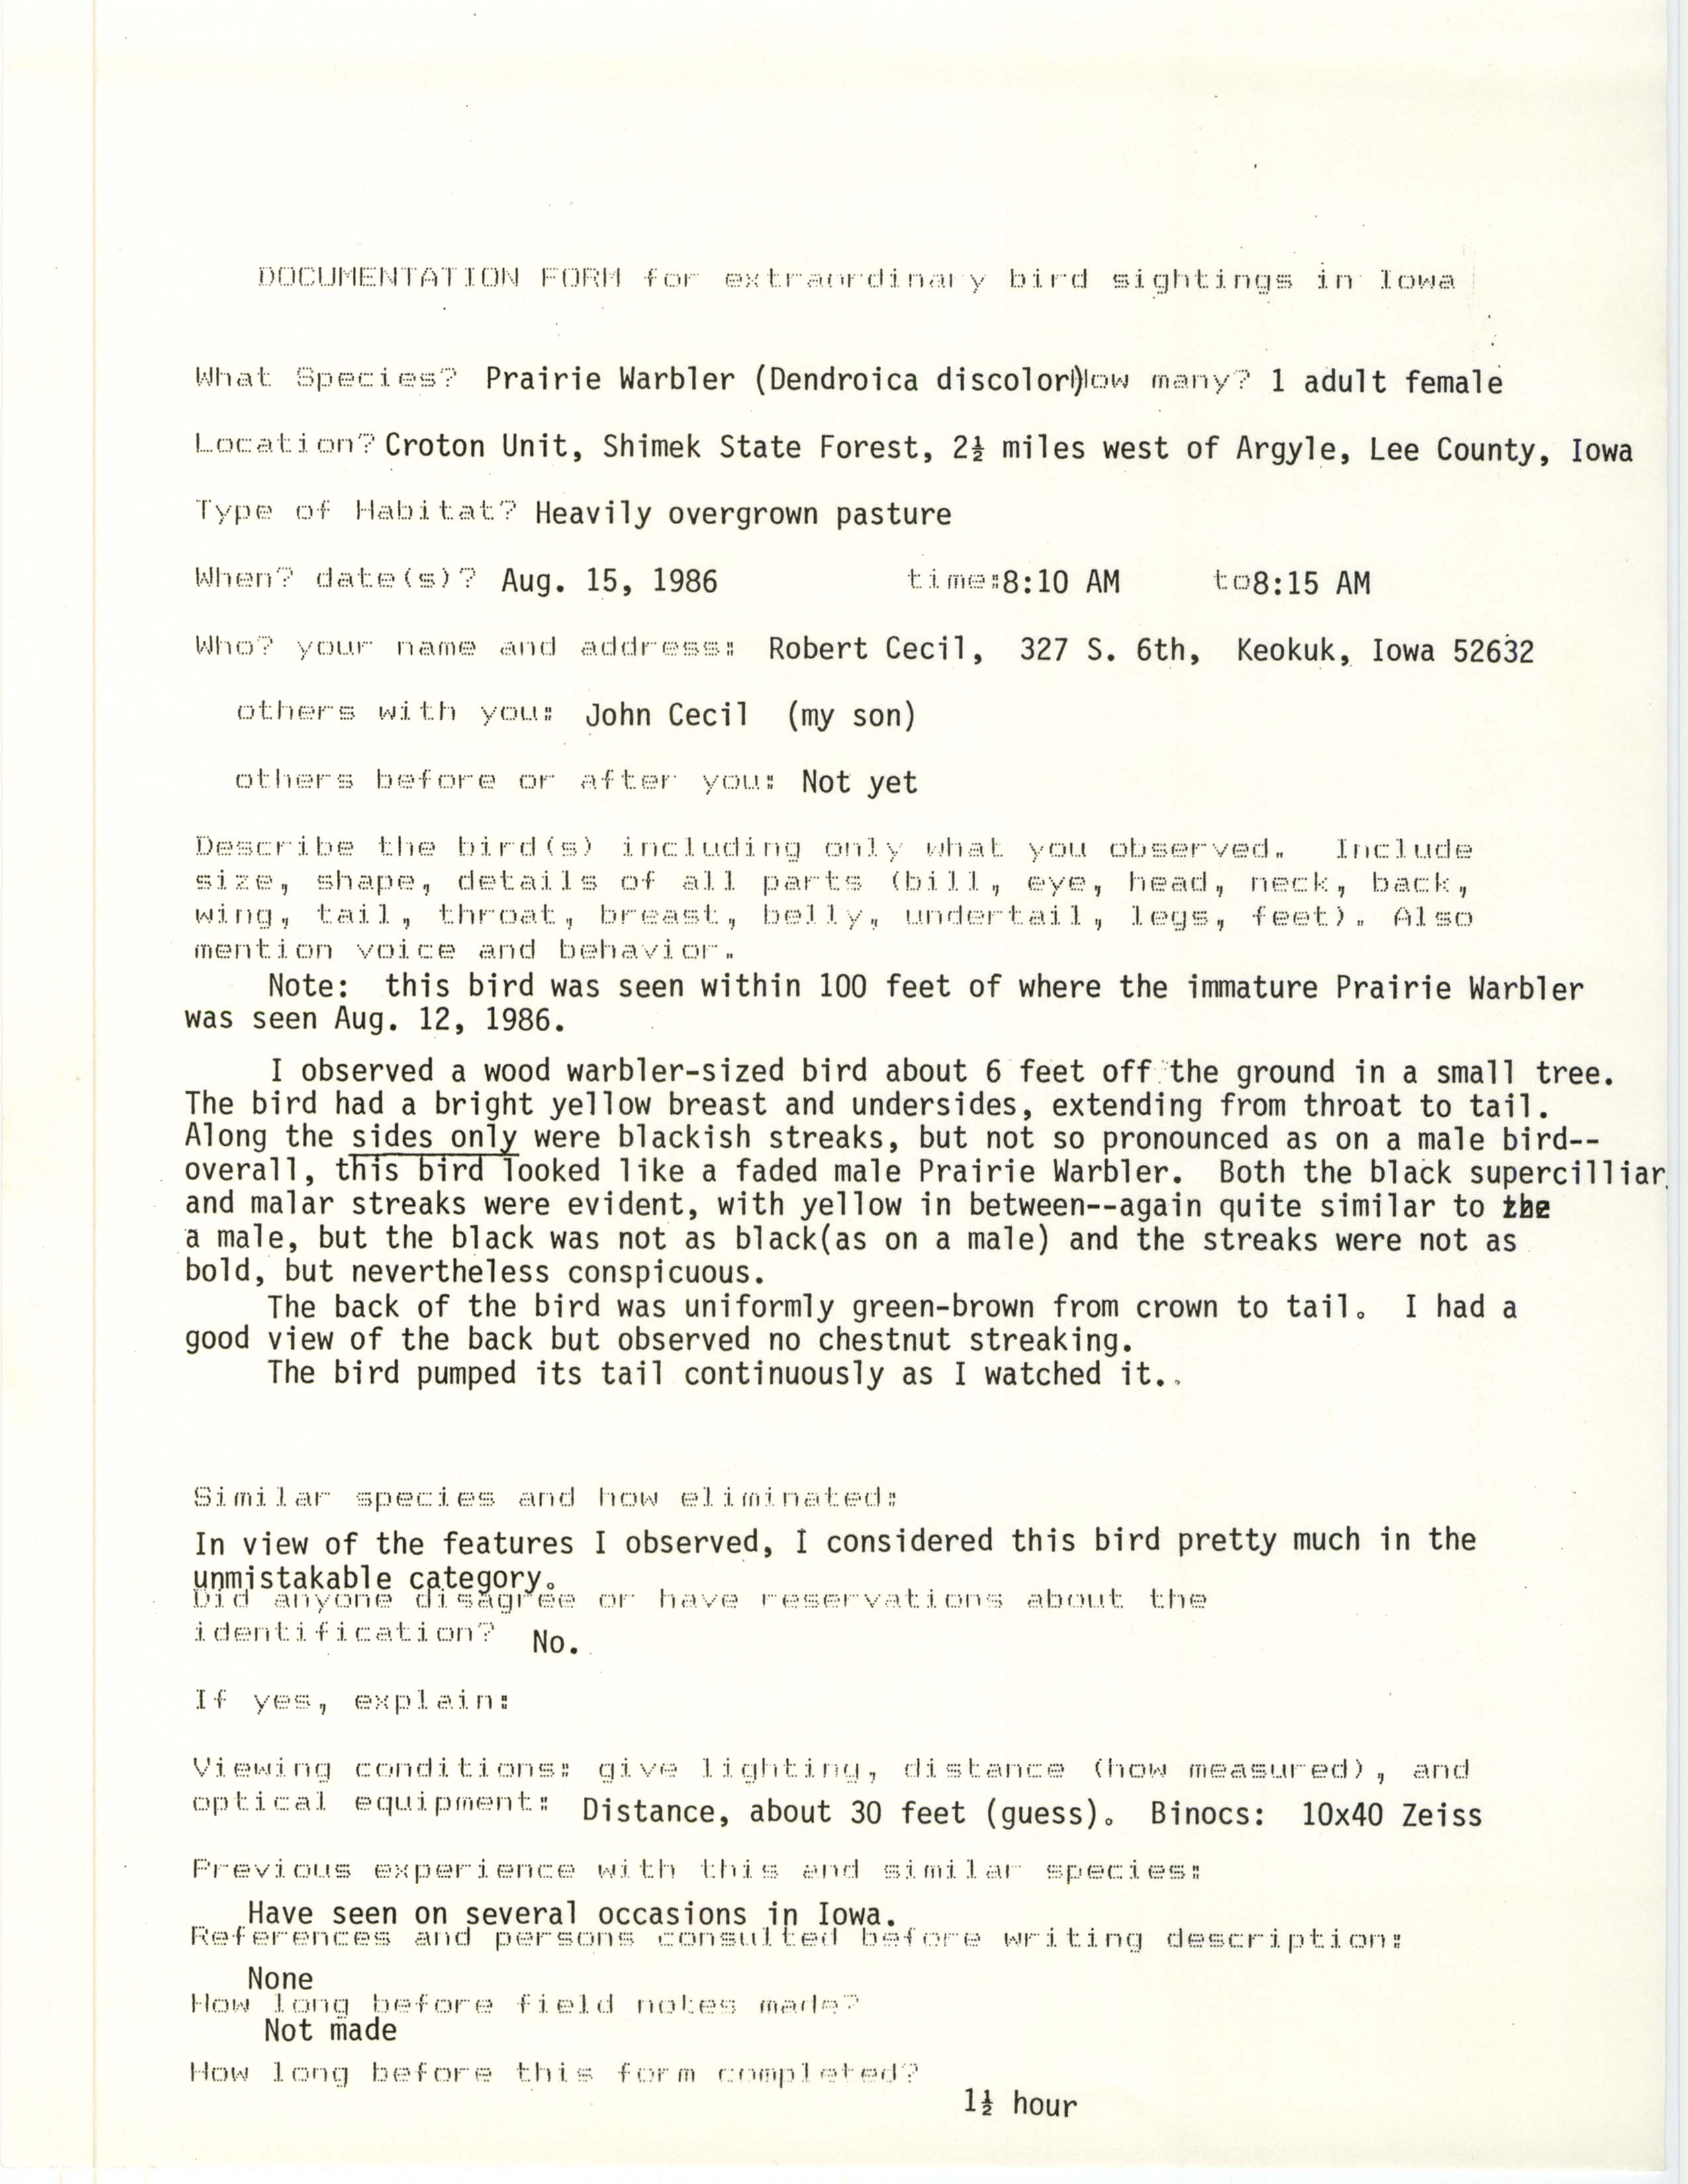 Rare bird documentation form for Prairie Warbler at the Croton Unit in Shimek State Forest, 1986